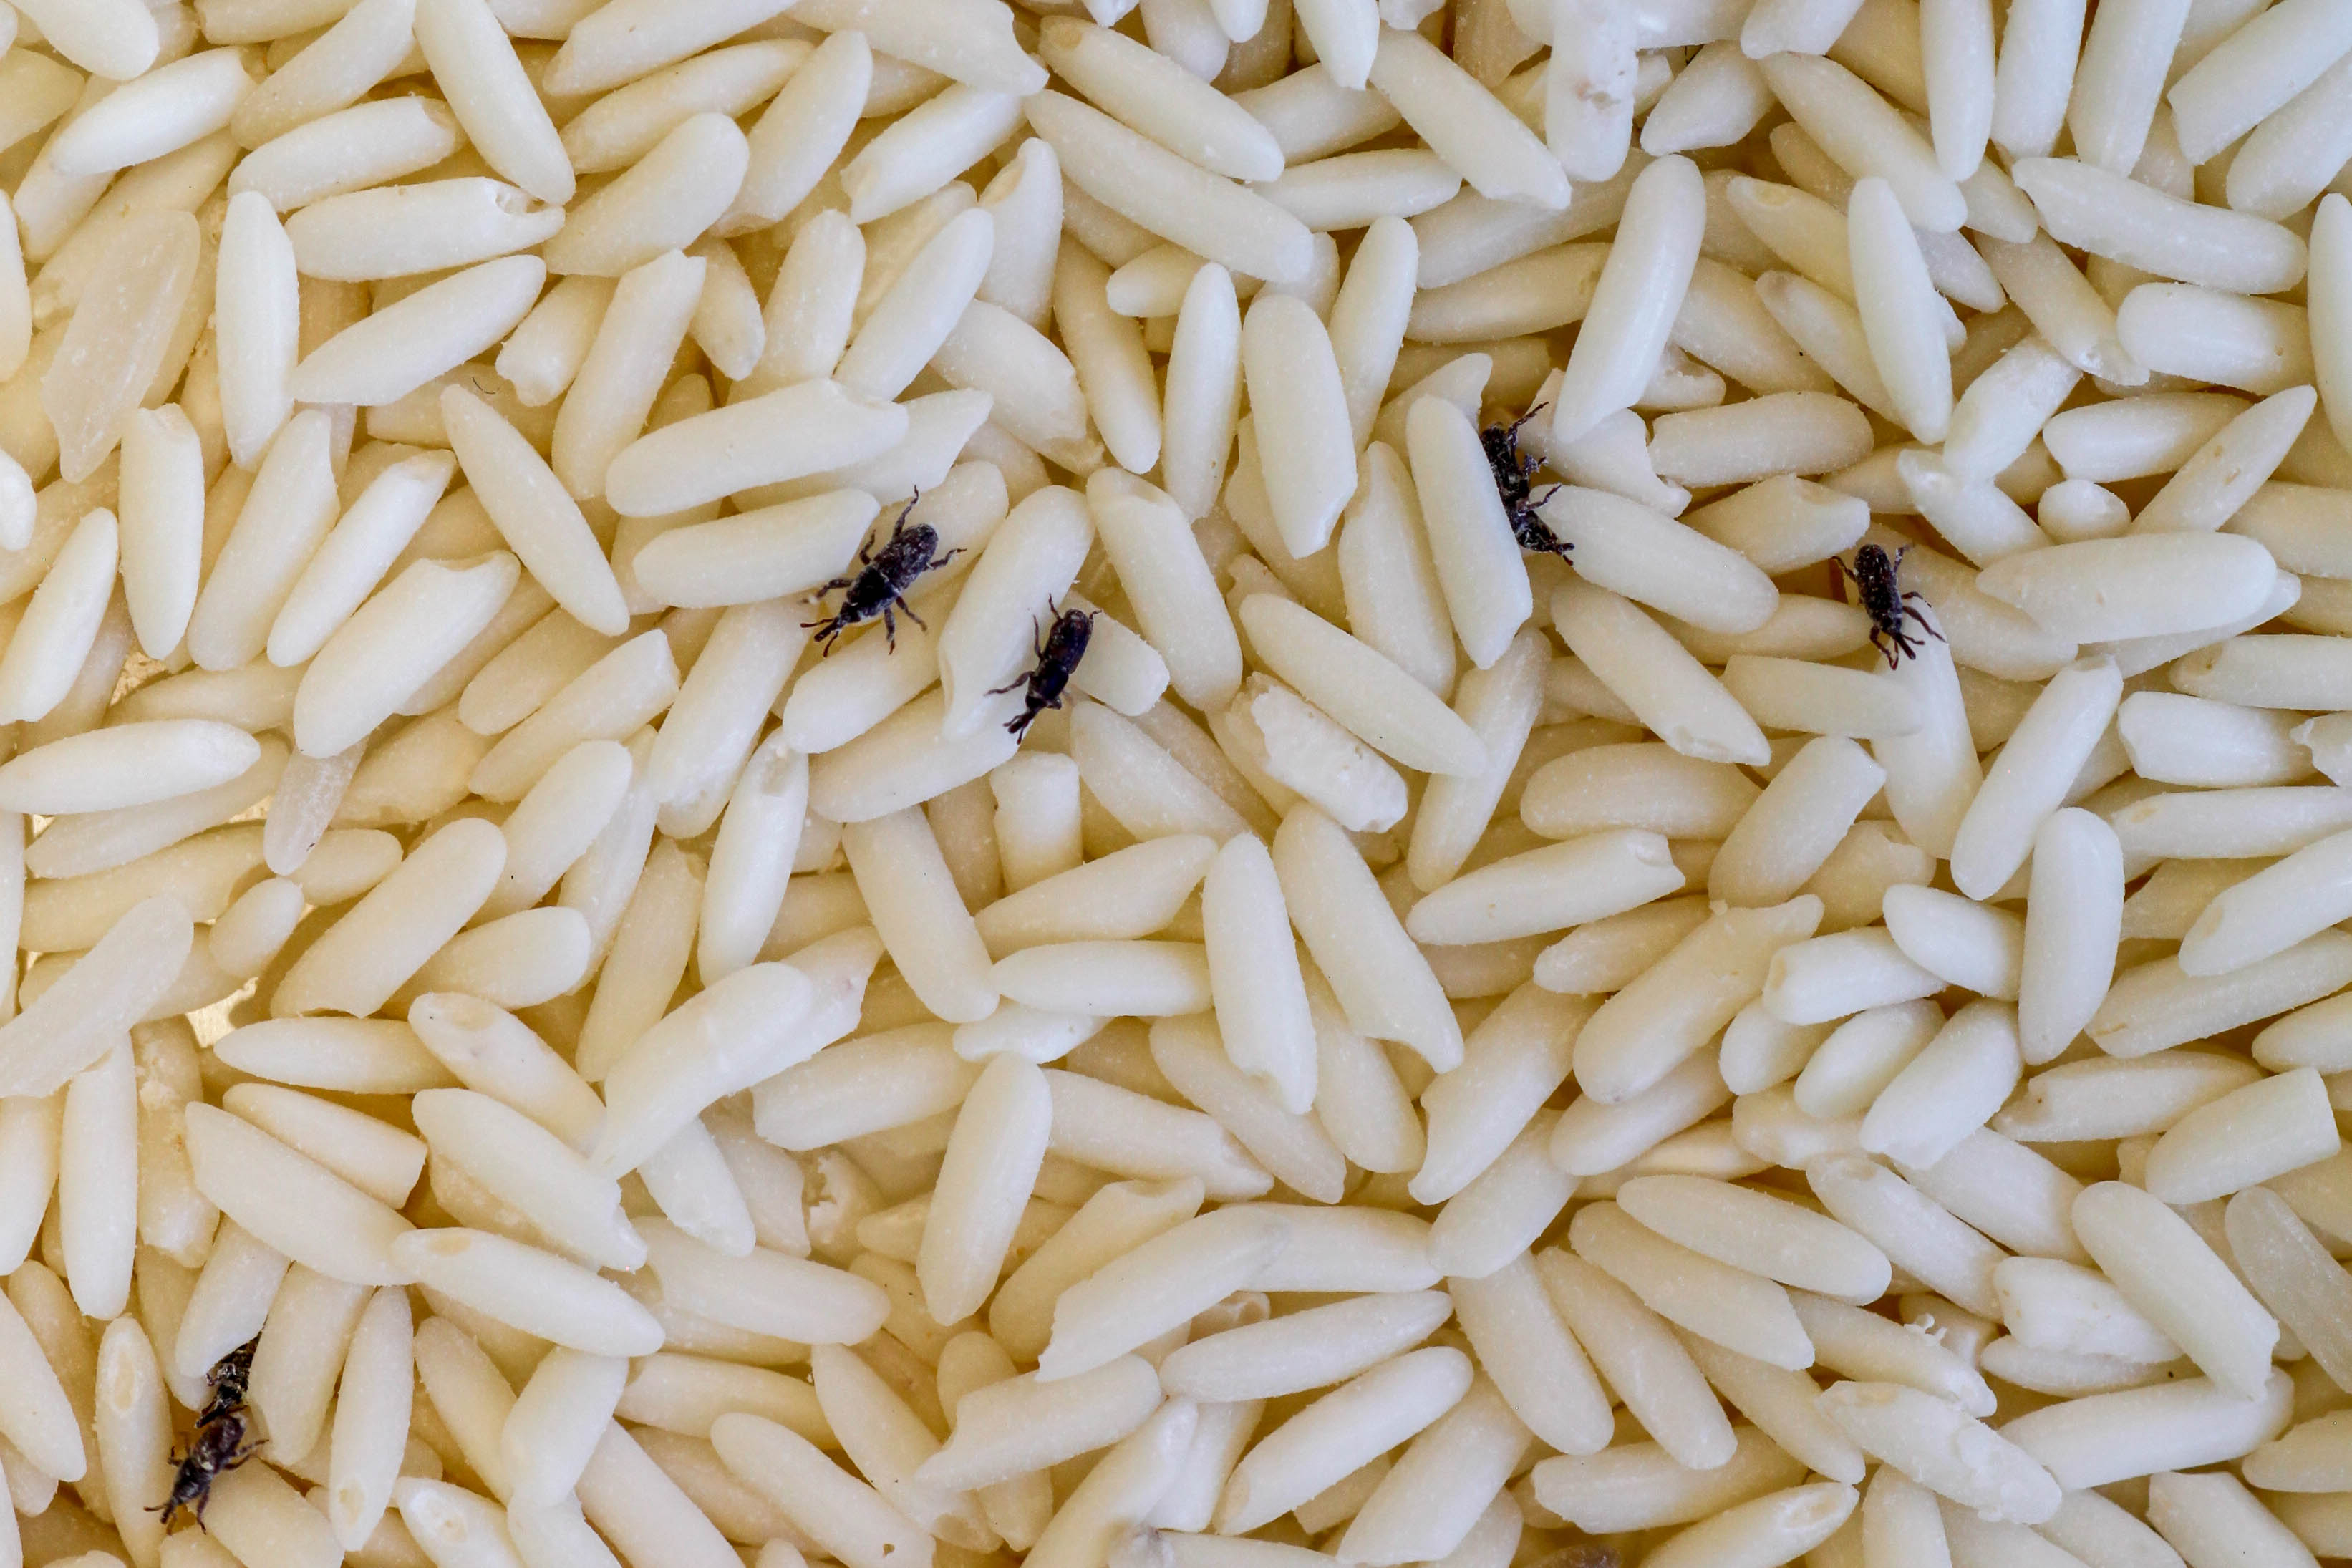 Weevils eating uncooked rice